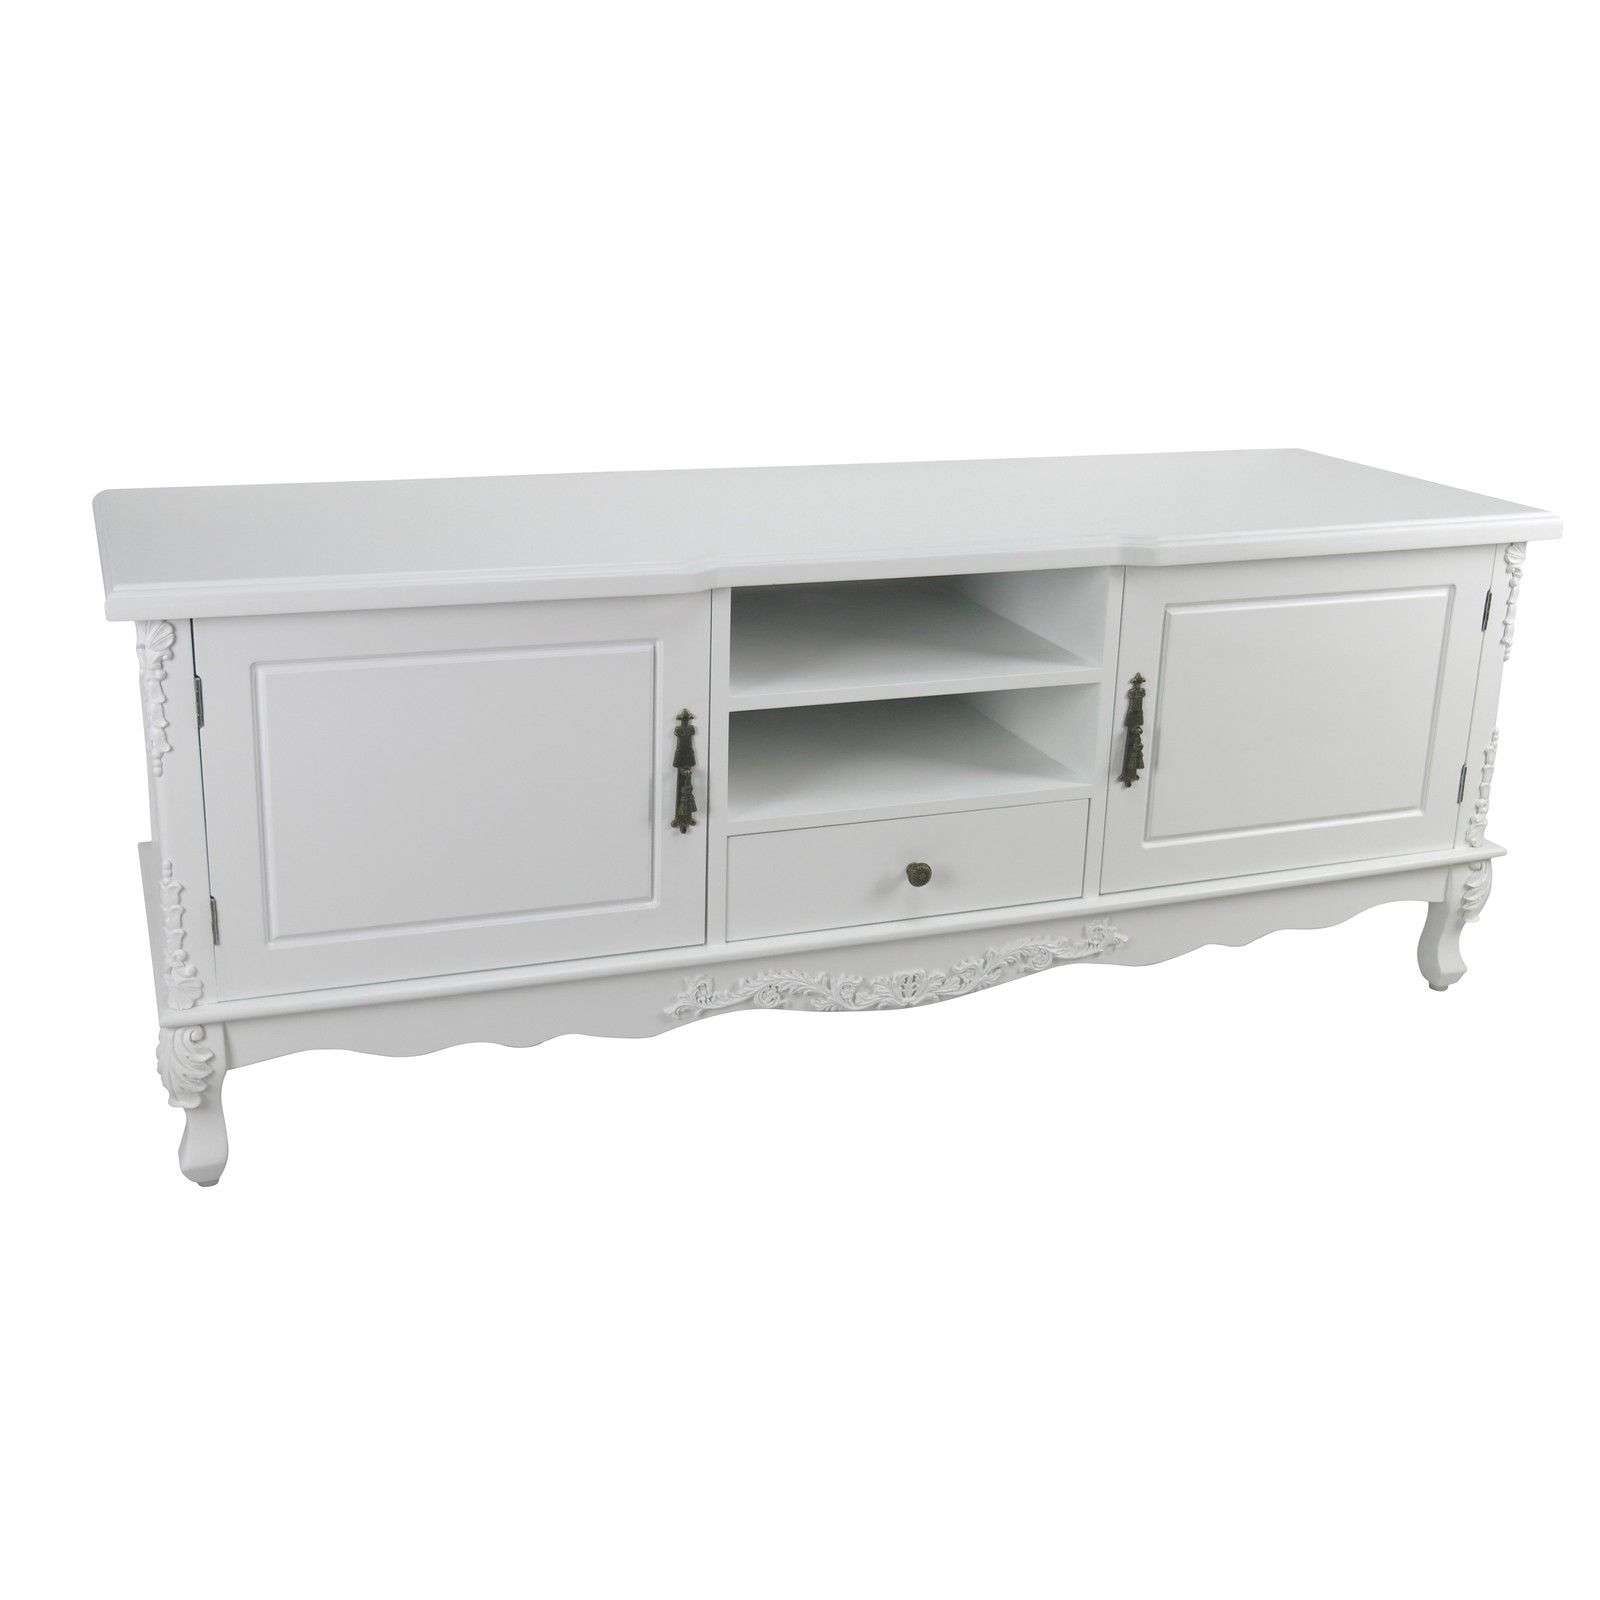 French Style White Large Cabinet Tv Unit Furniture – La Maison Within French Tv Cabinets (Gallery 16 of 20)